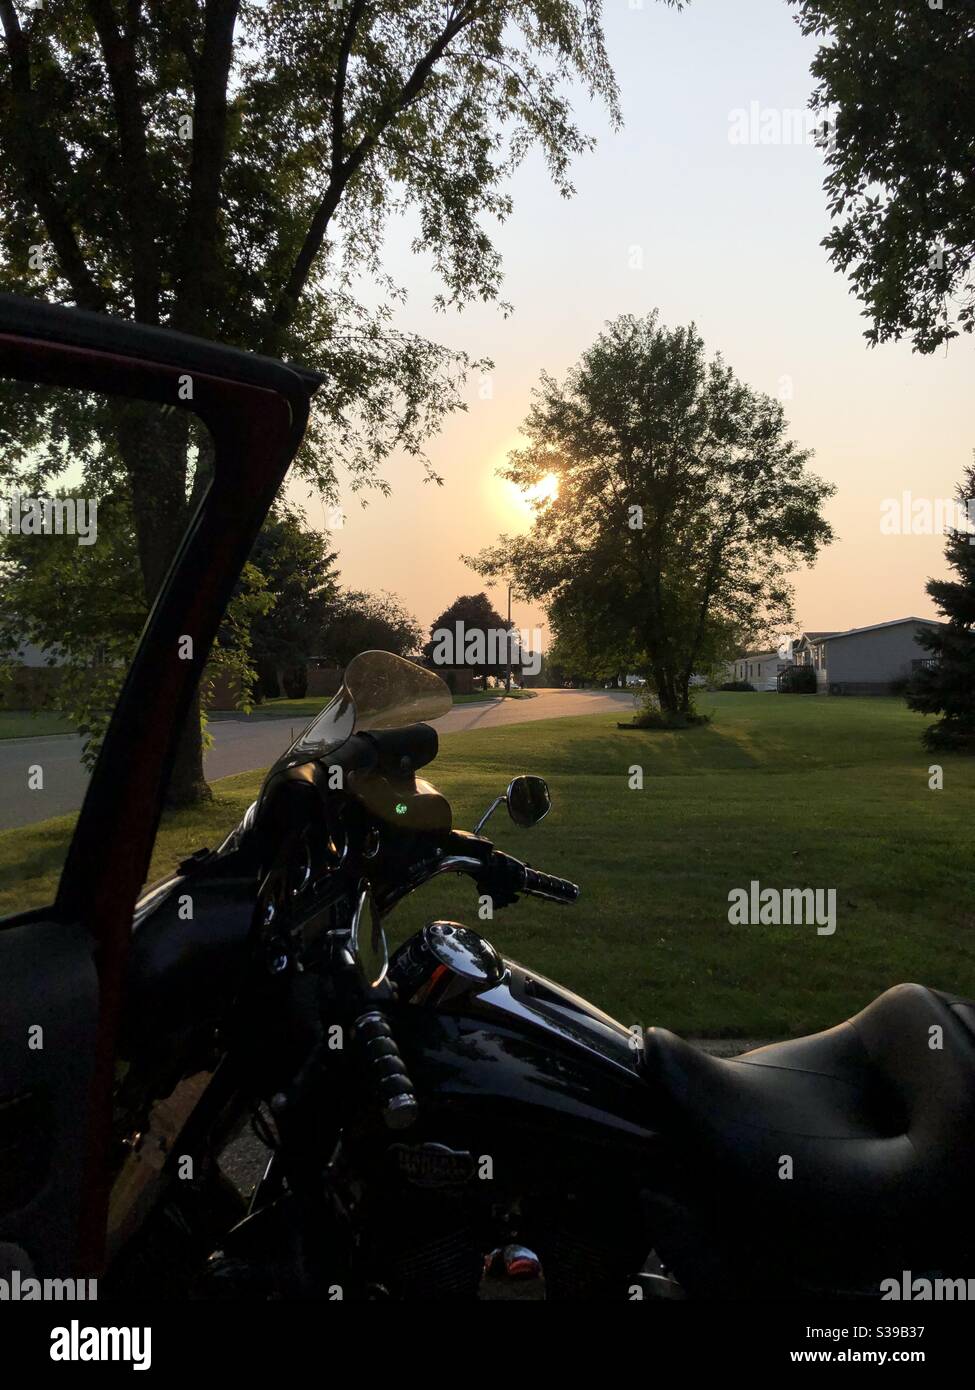 Motorcycle in front of sun settingsunsetting Stock Photo